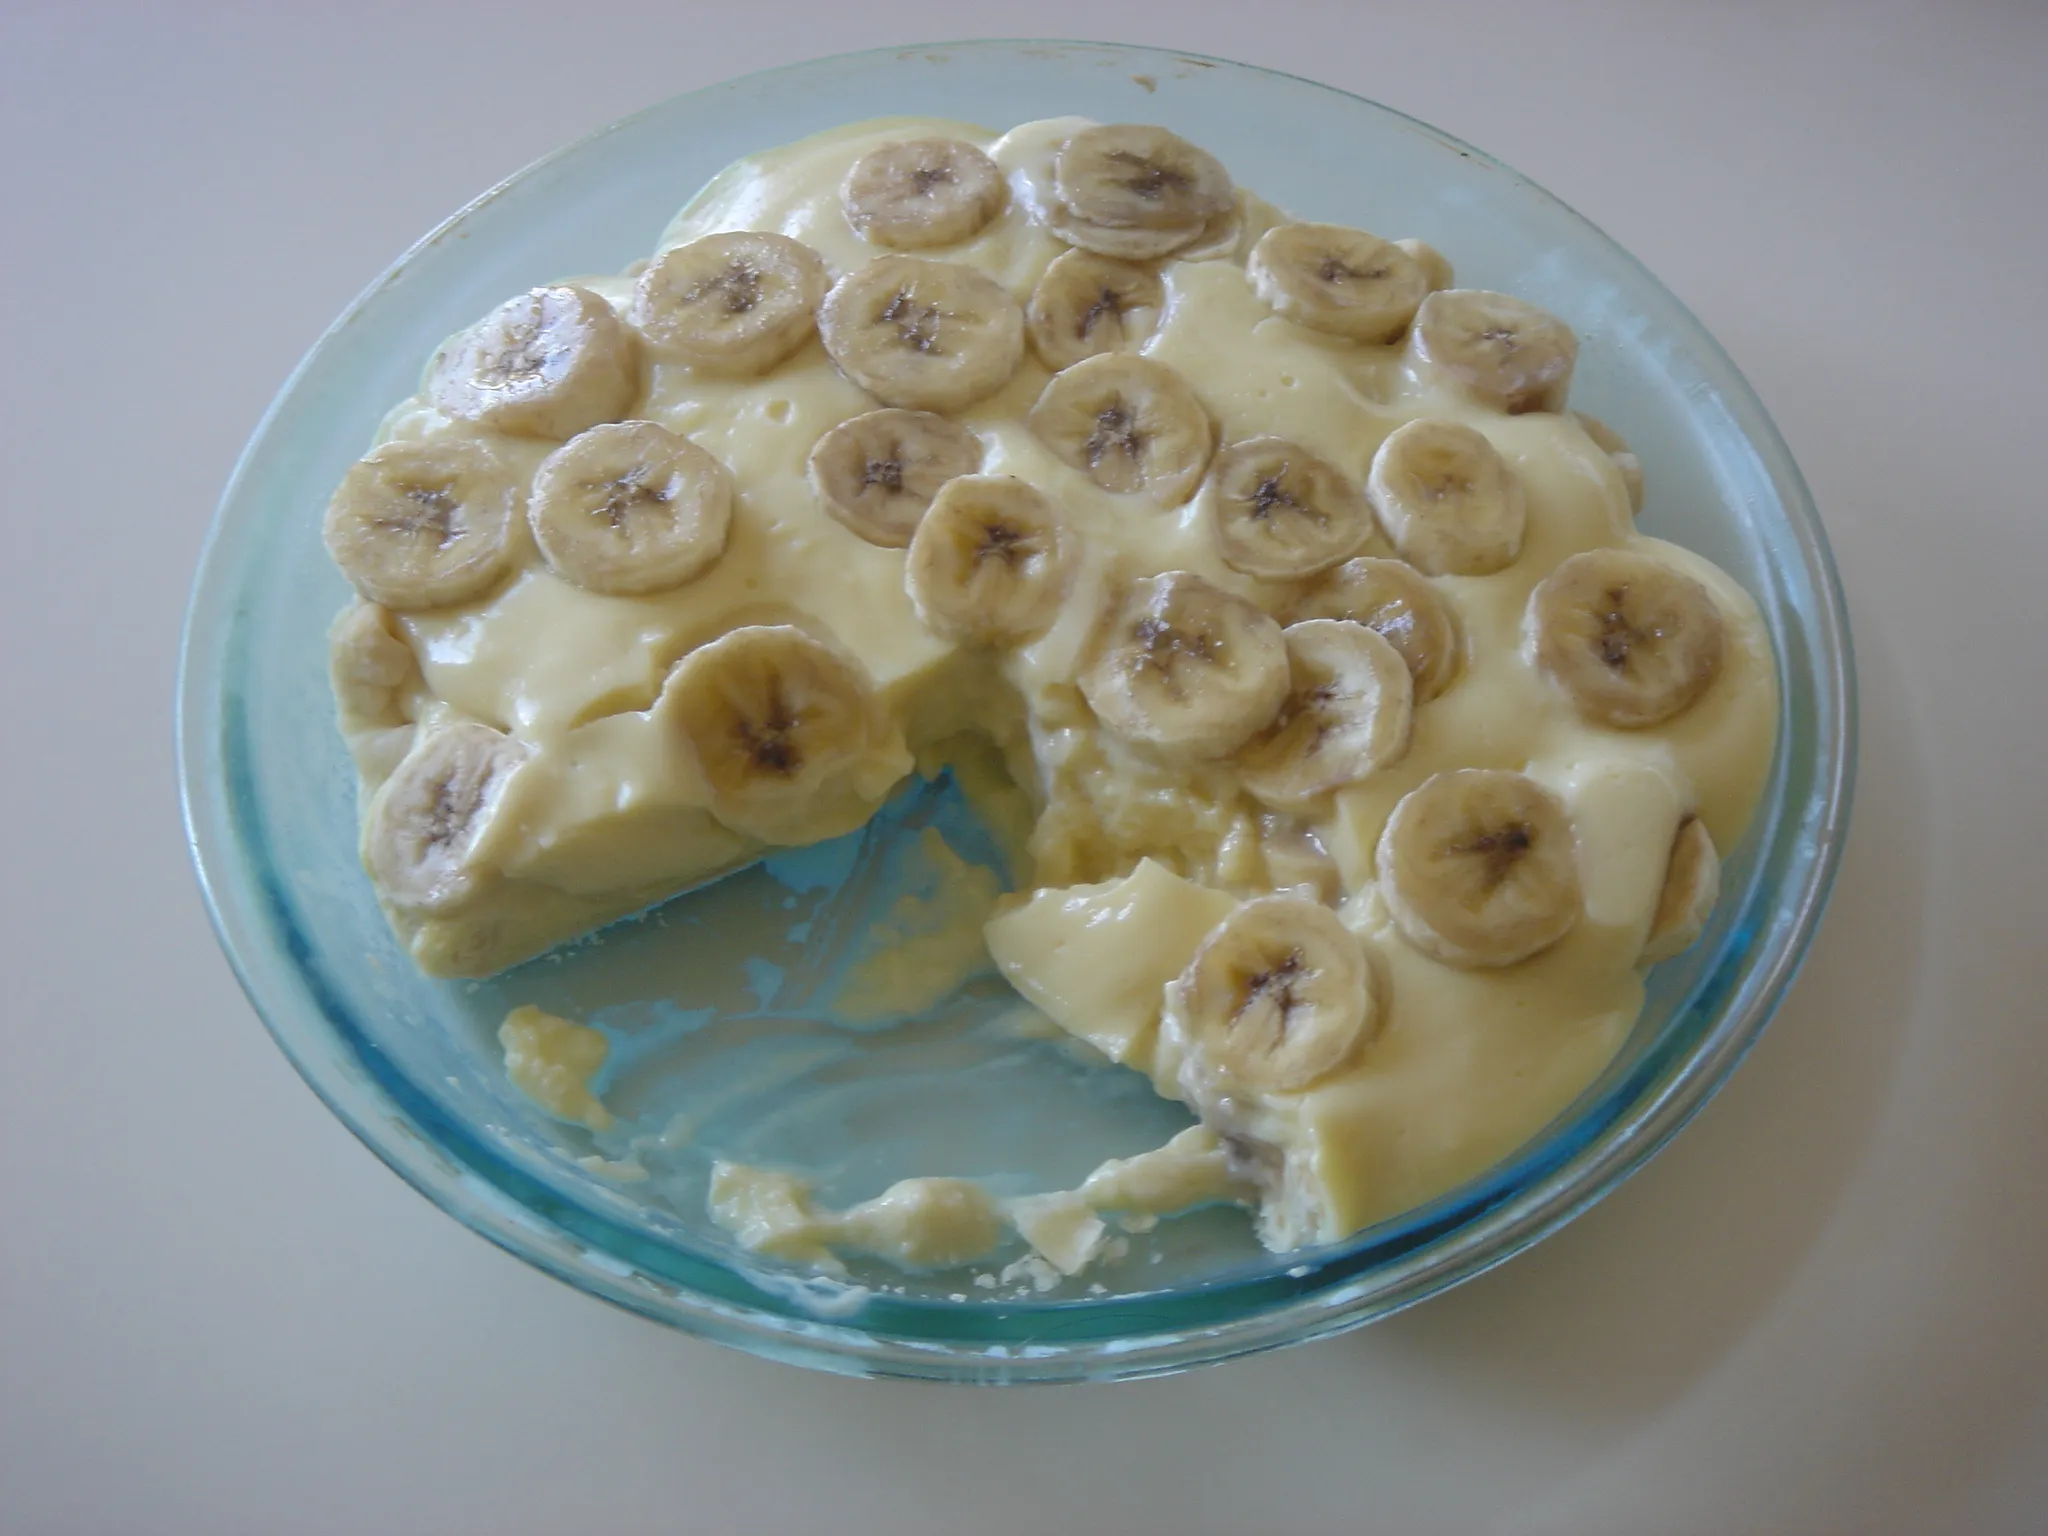 Easy Banana Pudding Recipe with Nilla Wafers – Delicious and Comforting Dessert